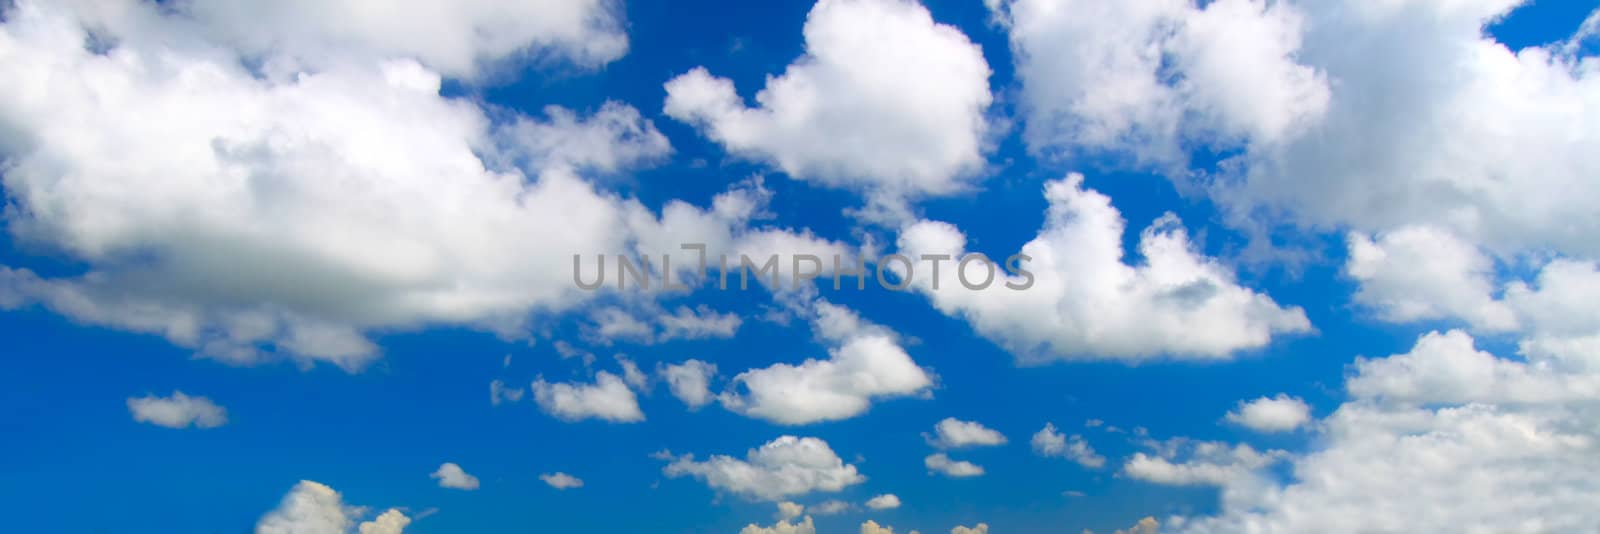 Panoramic view of scattered clouds against a bright blue sky.